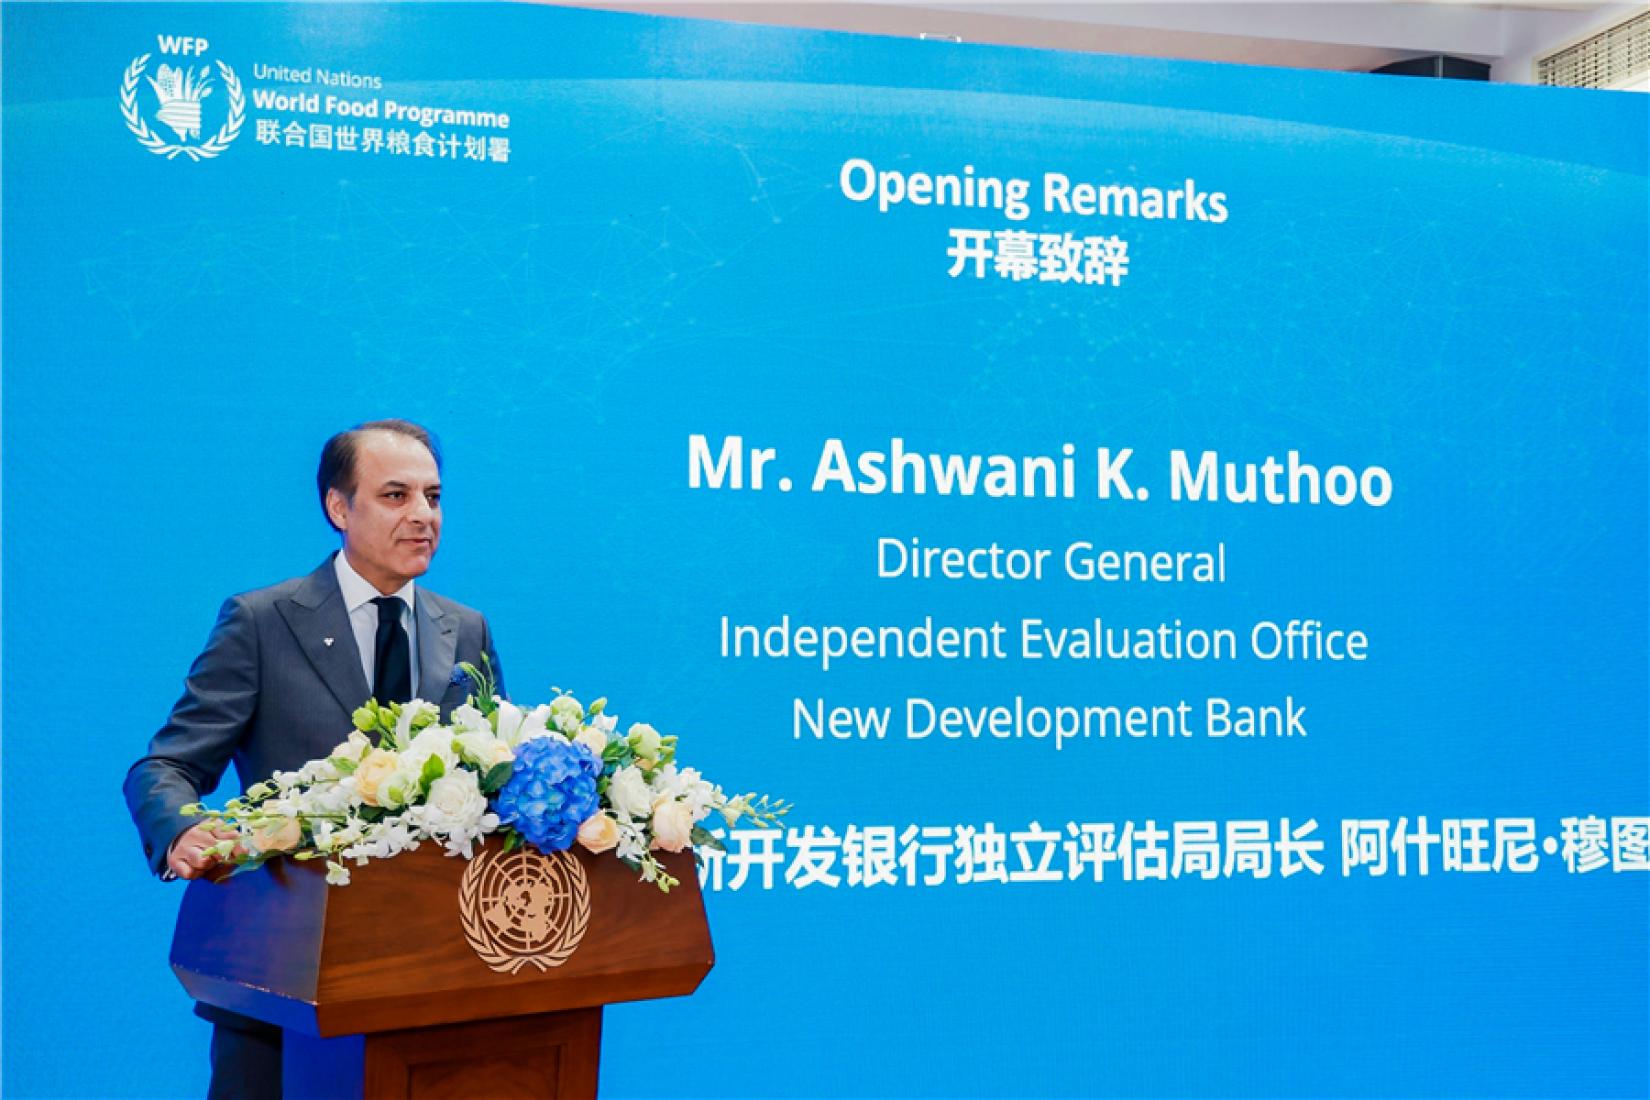 Ashwani K. Muthoo, Director General of New Development Bank’s Independent Evaluation Office delivers a speech at the South-South Cooperation Knowledge Sharing Forum